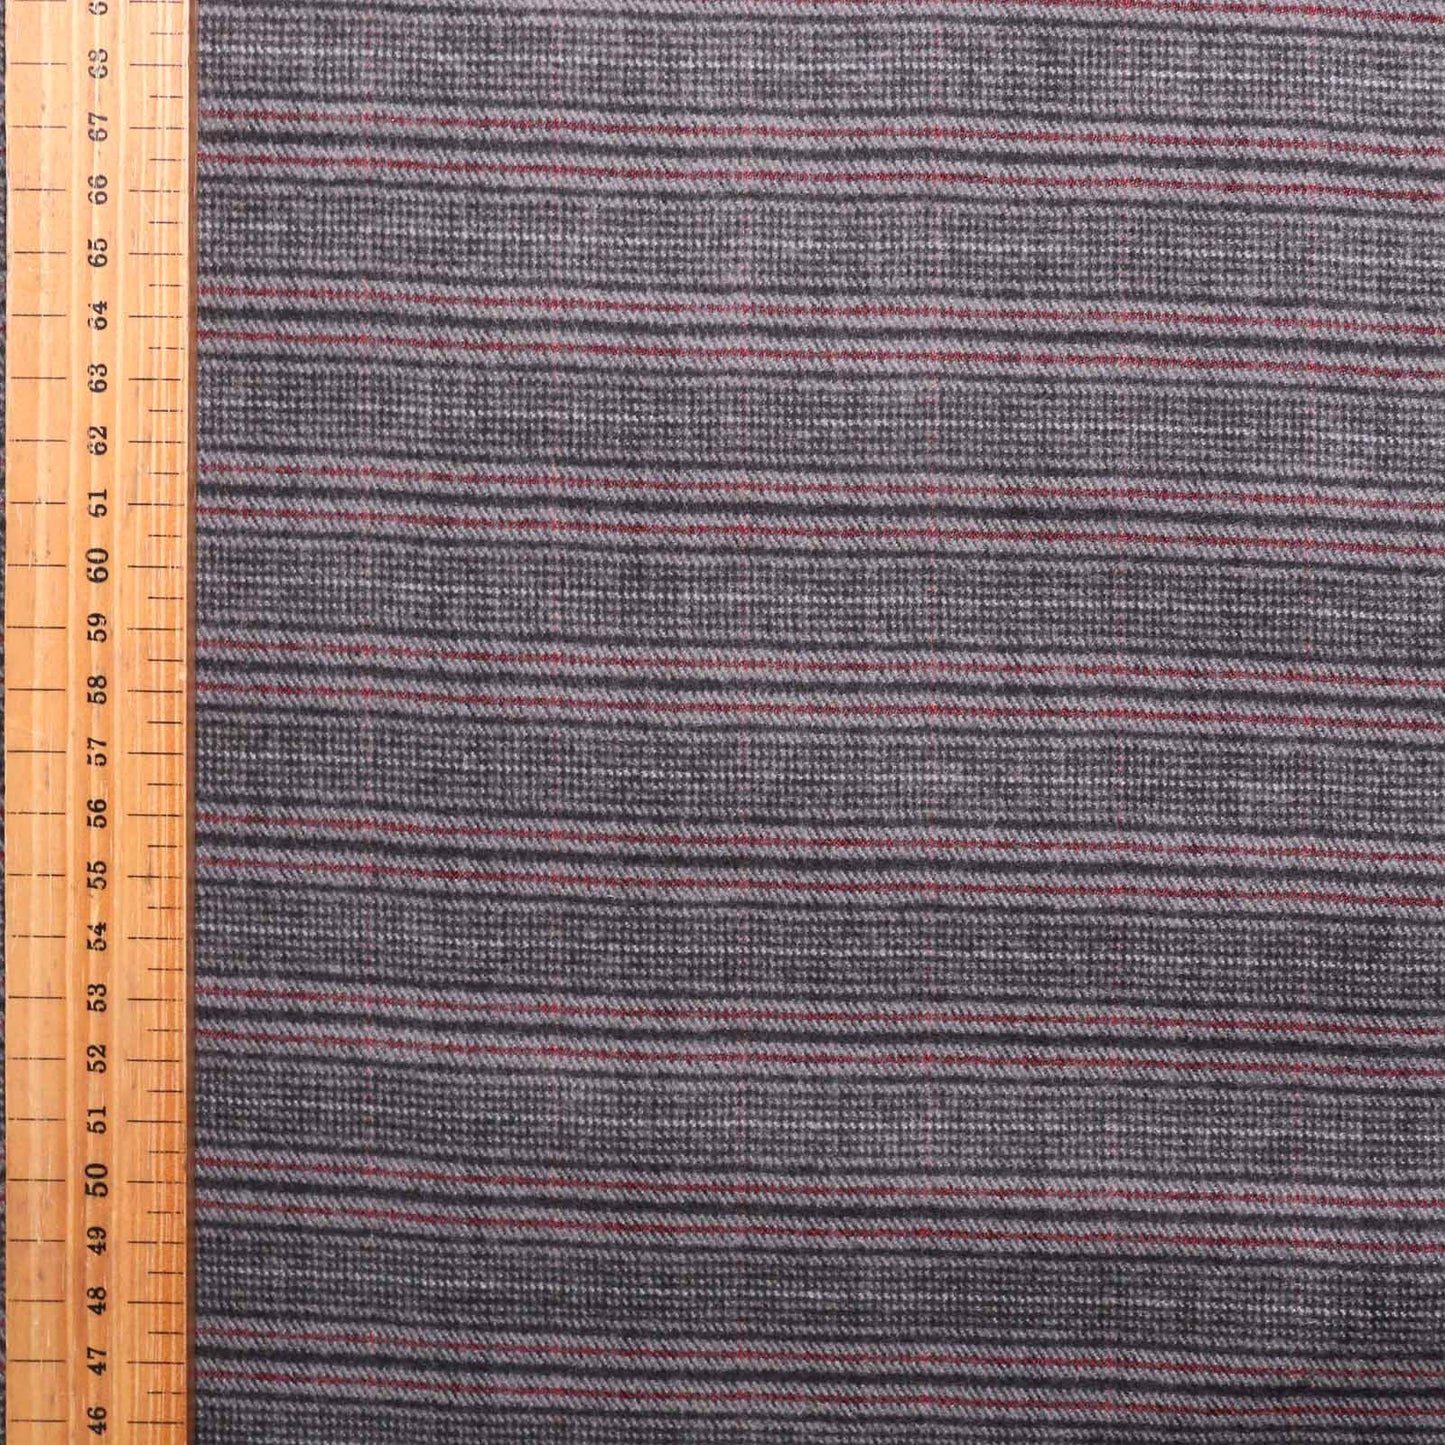 metre brushed cotton dressmaking fabric with grey red and black check design